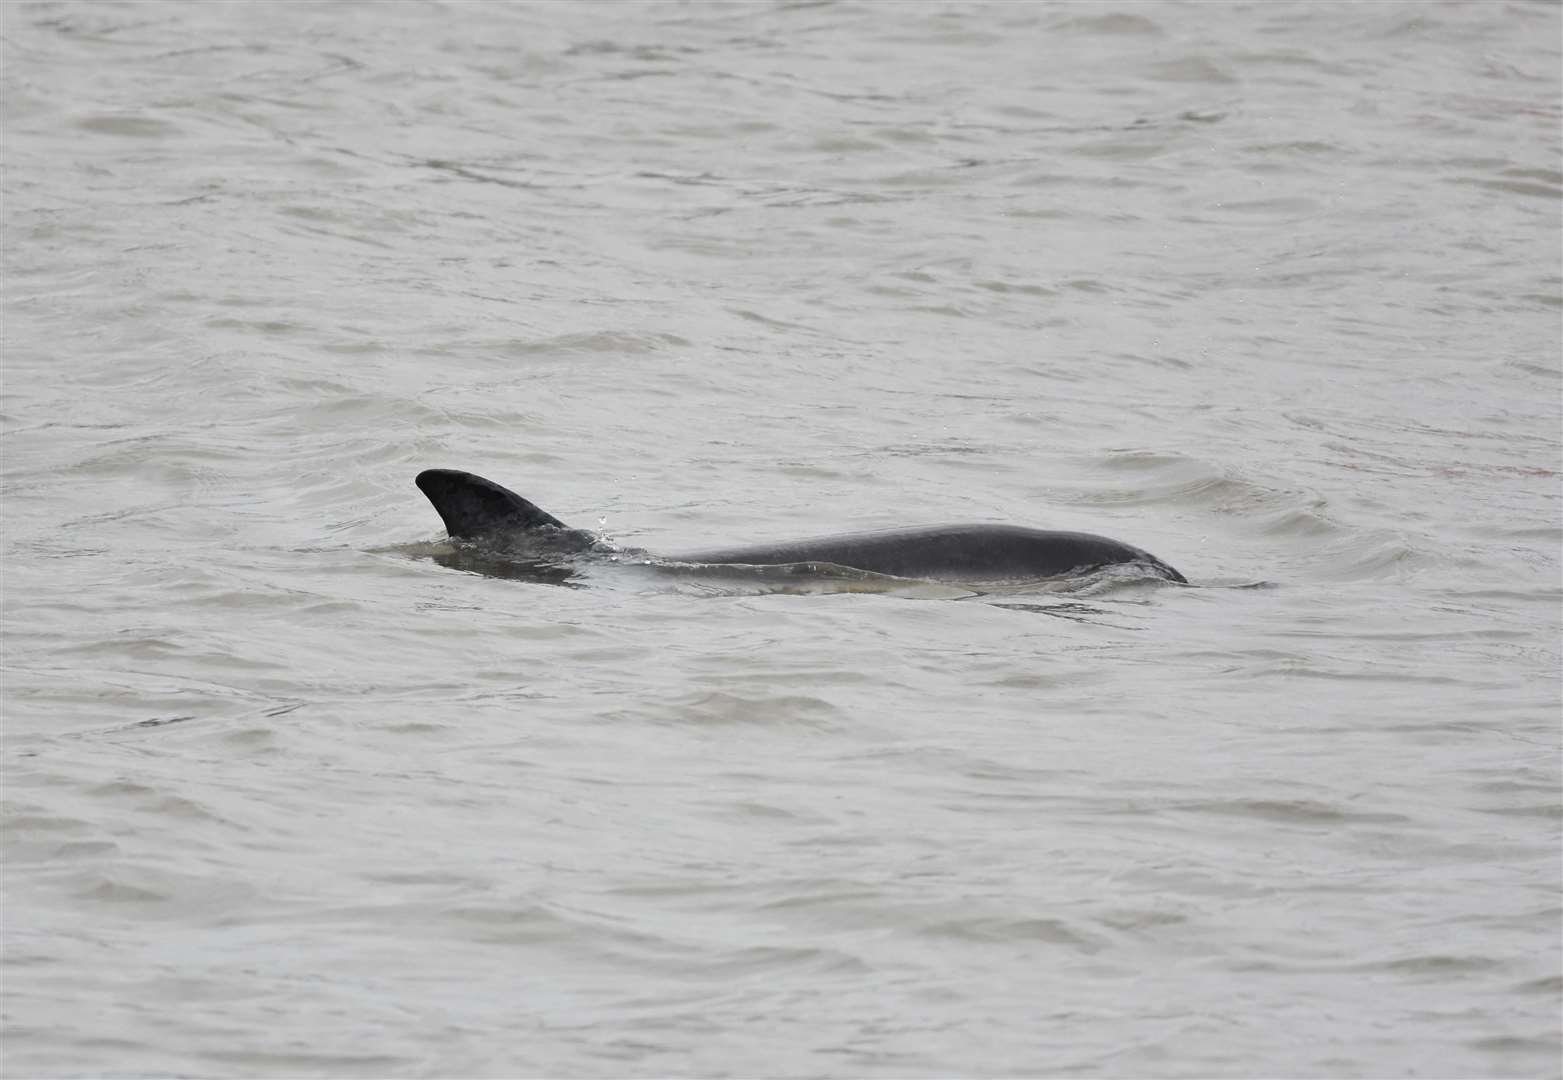 They were spotted swimming near Gravesend Town Pier. Picture: Jason Arthur